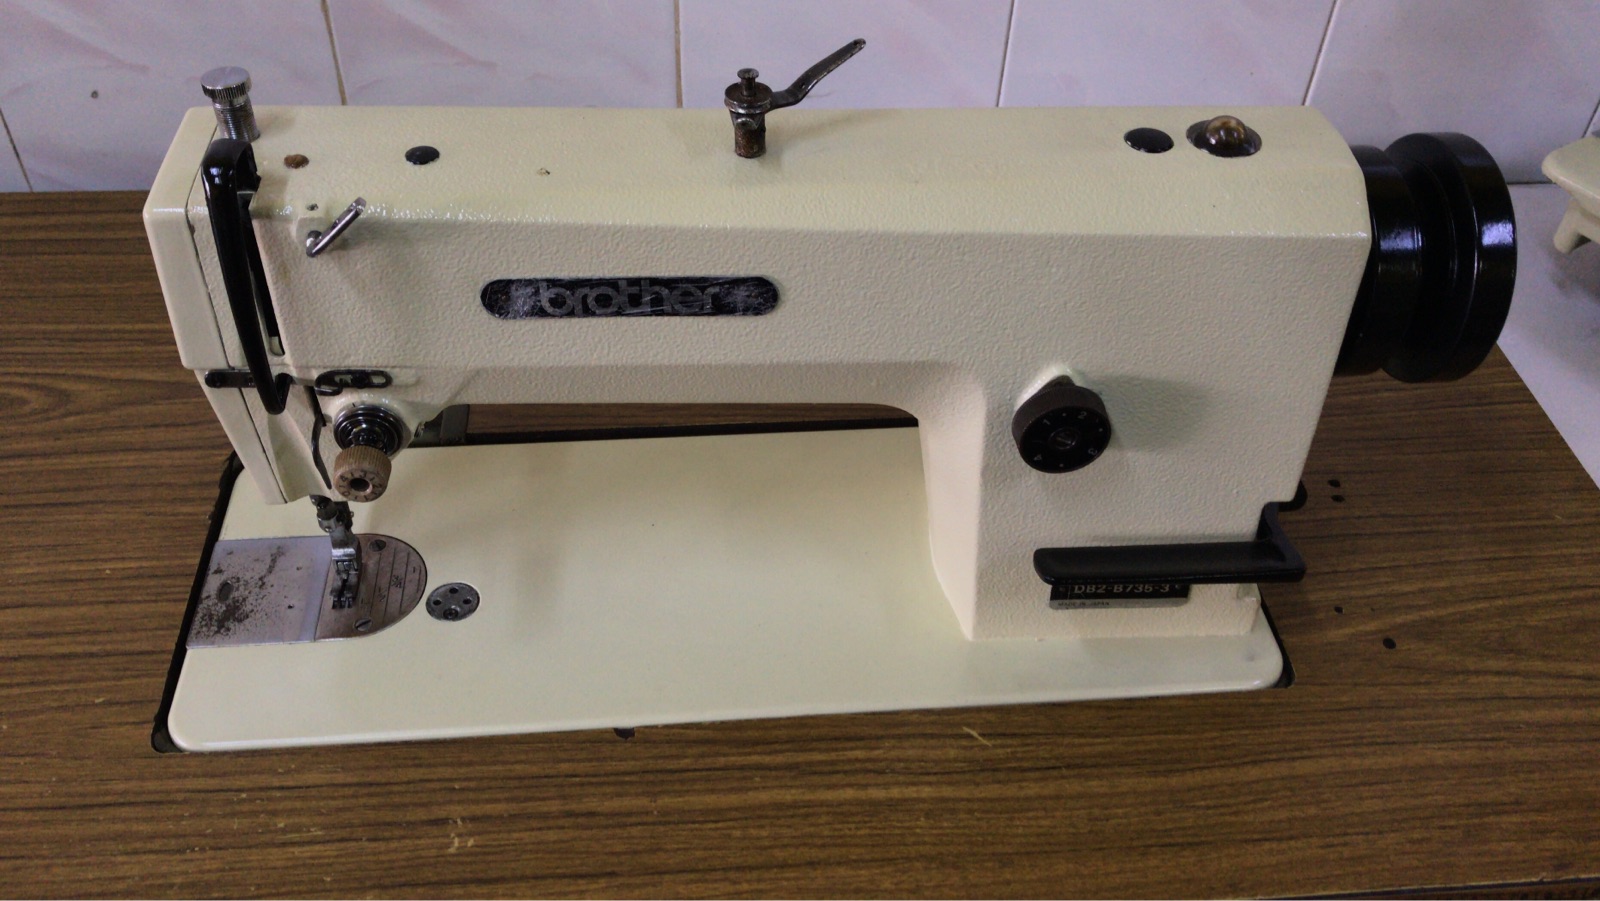 2nd Brother Hi Speed Sewing Machine 